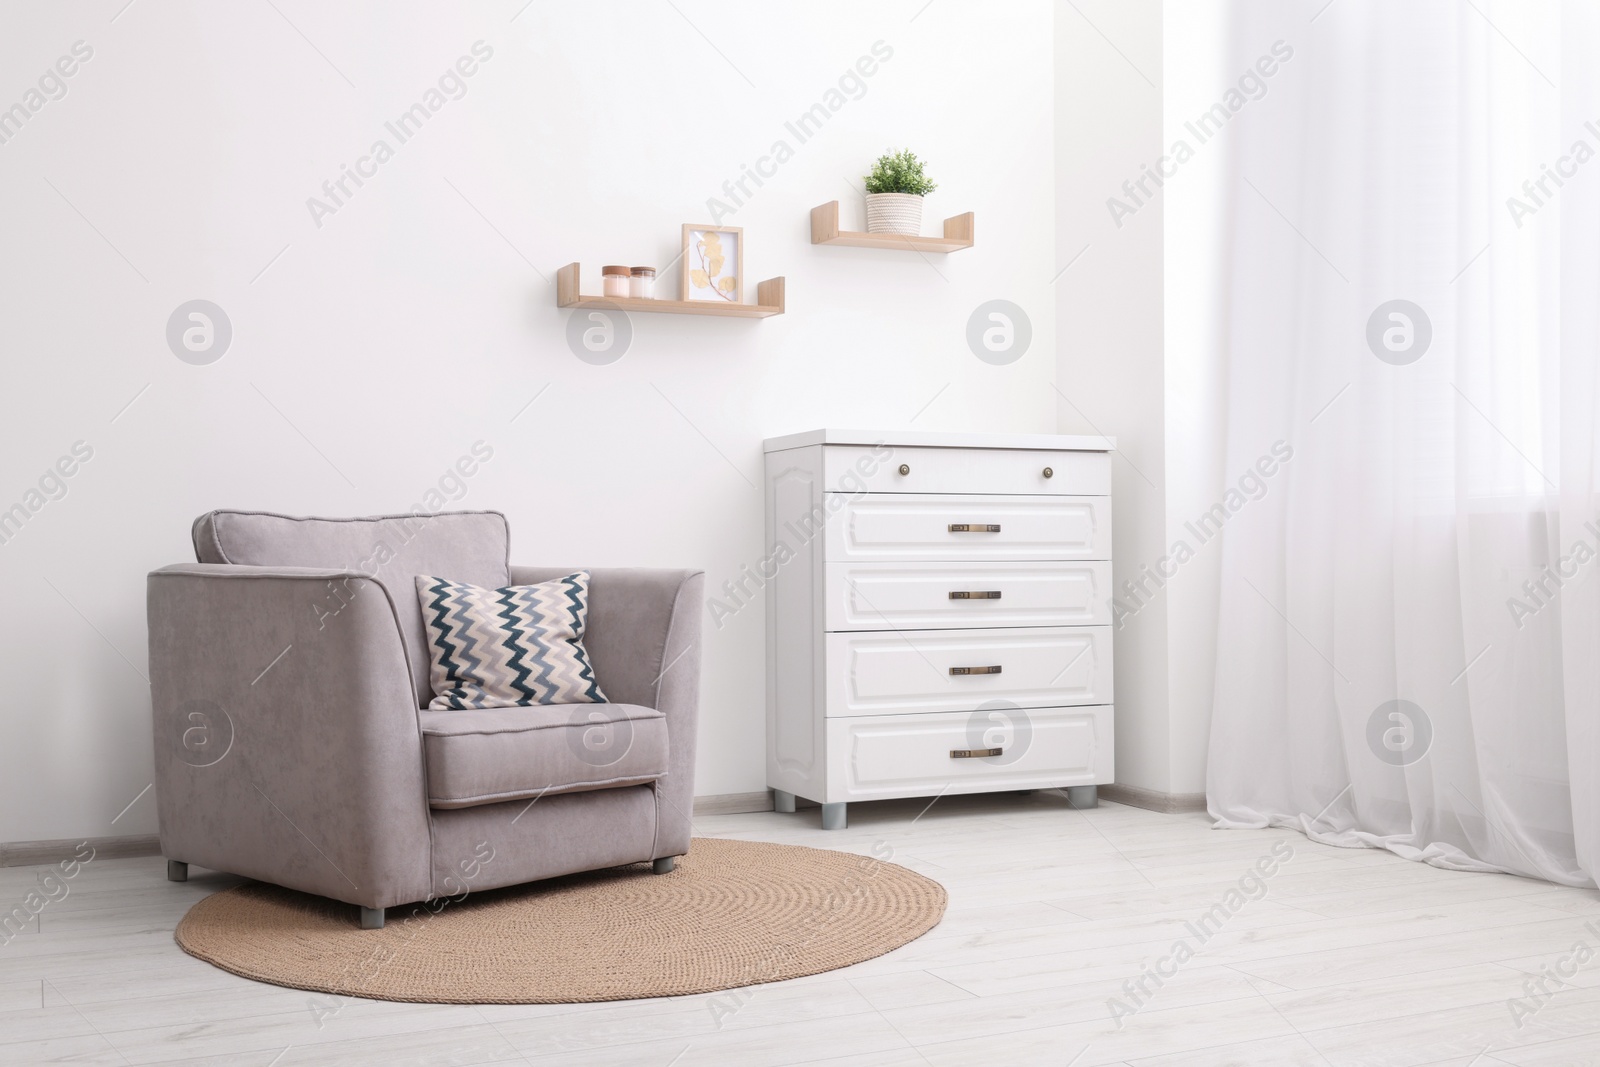 Photo of Stylish armchair and chest of drawers in room. Interior design